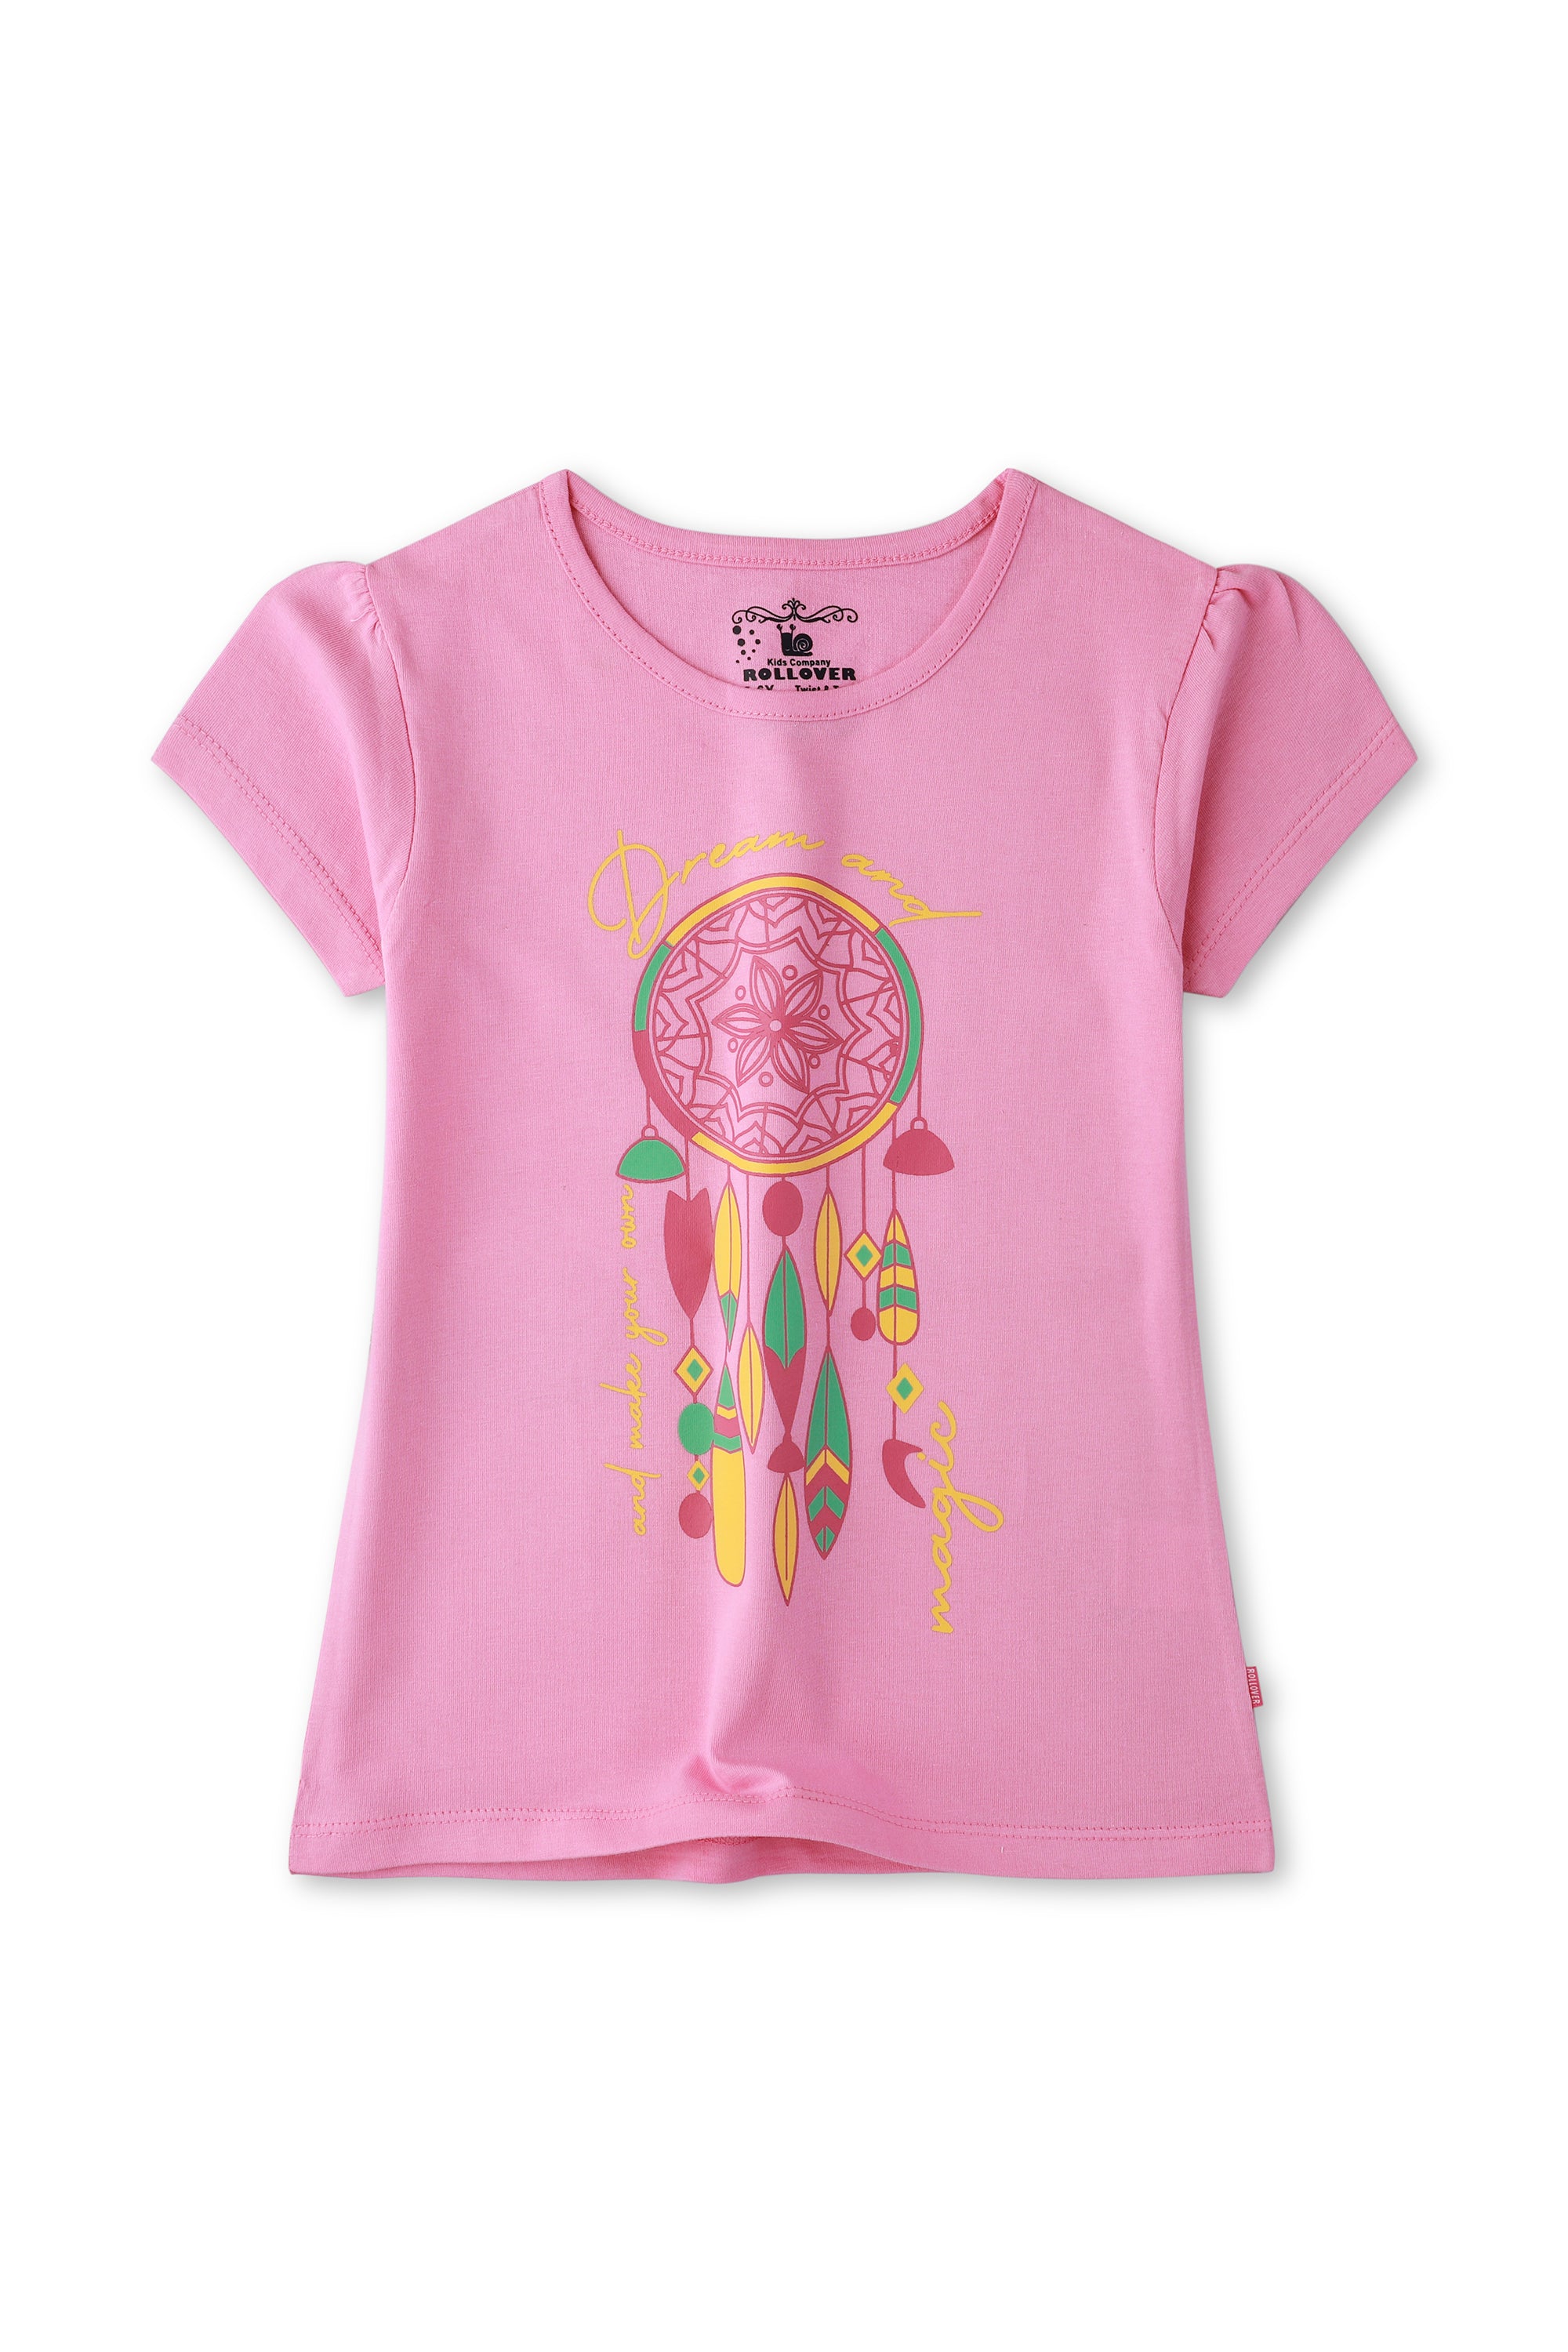 Cadillac Pink t-shirt for Girls